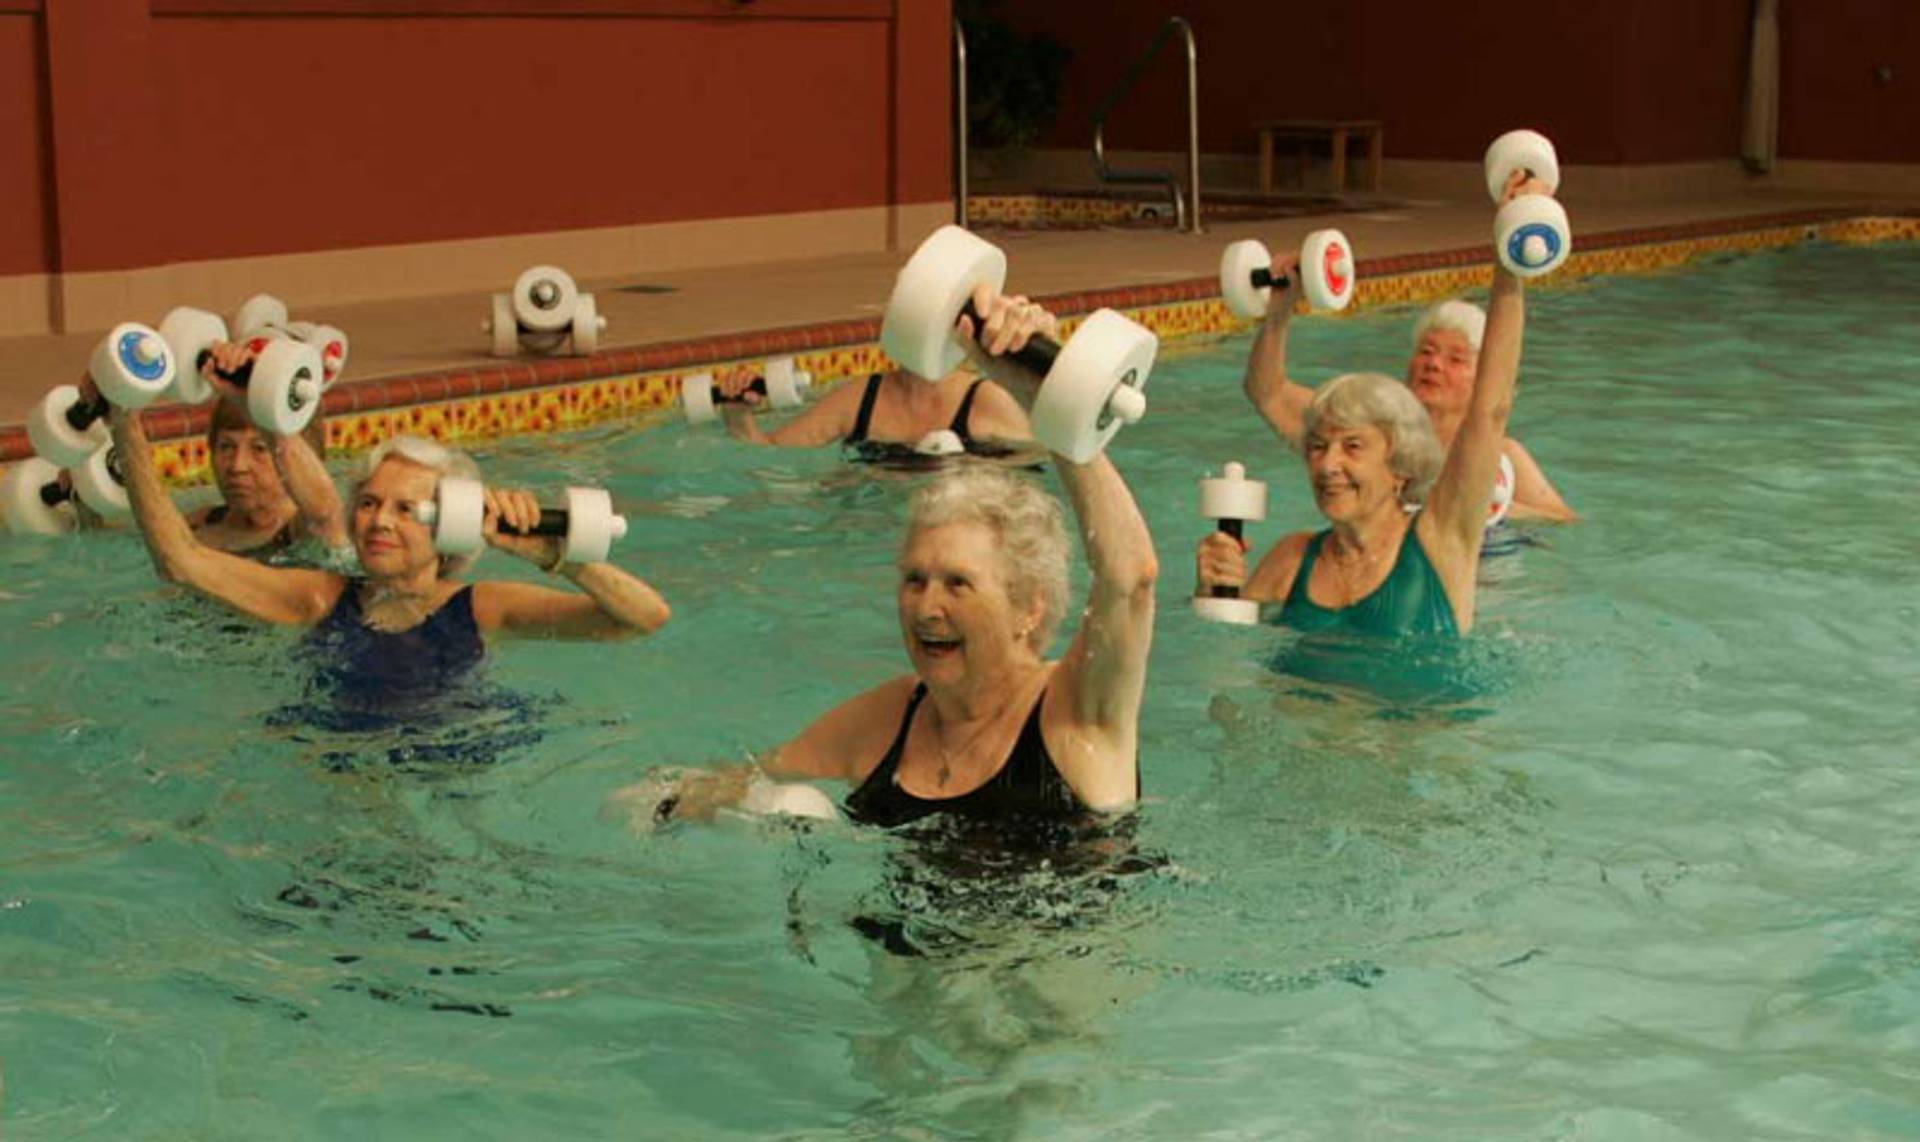 Fitness gets personal for Boomers